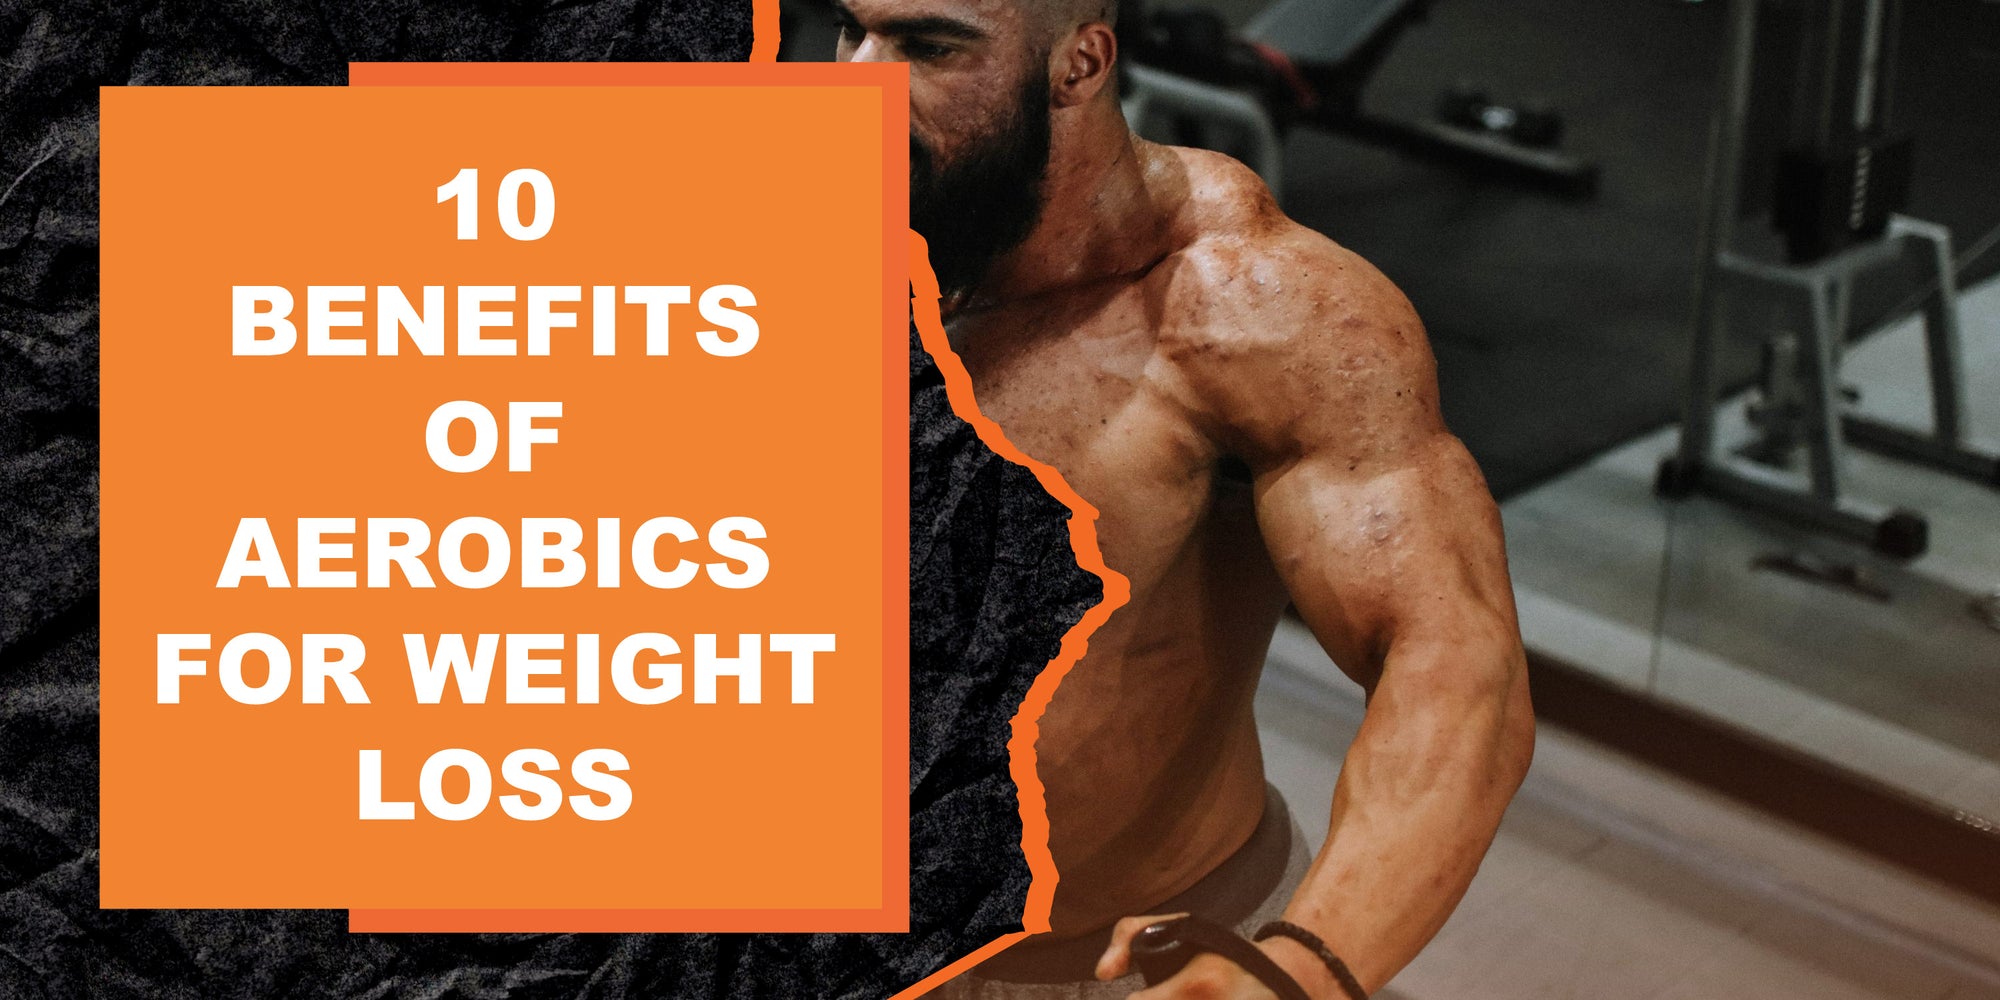 10 Benefits of Aerobics for Weight Loss